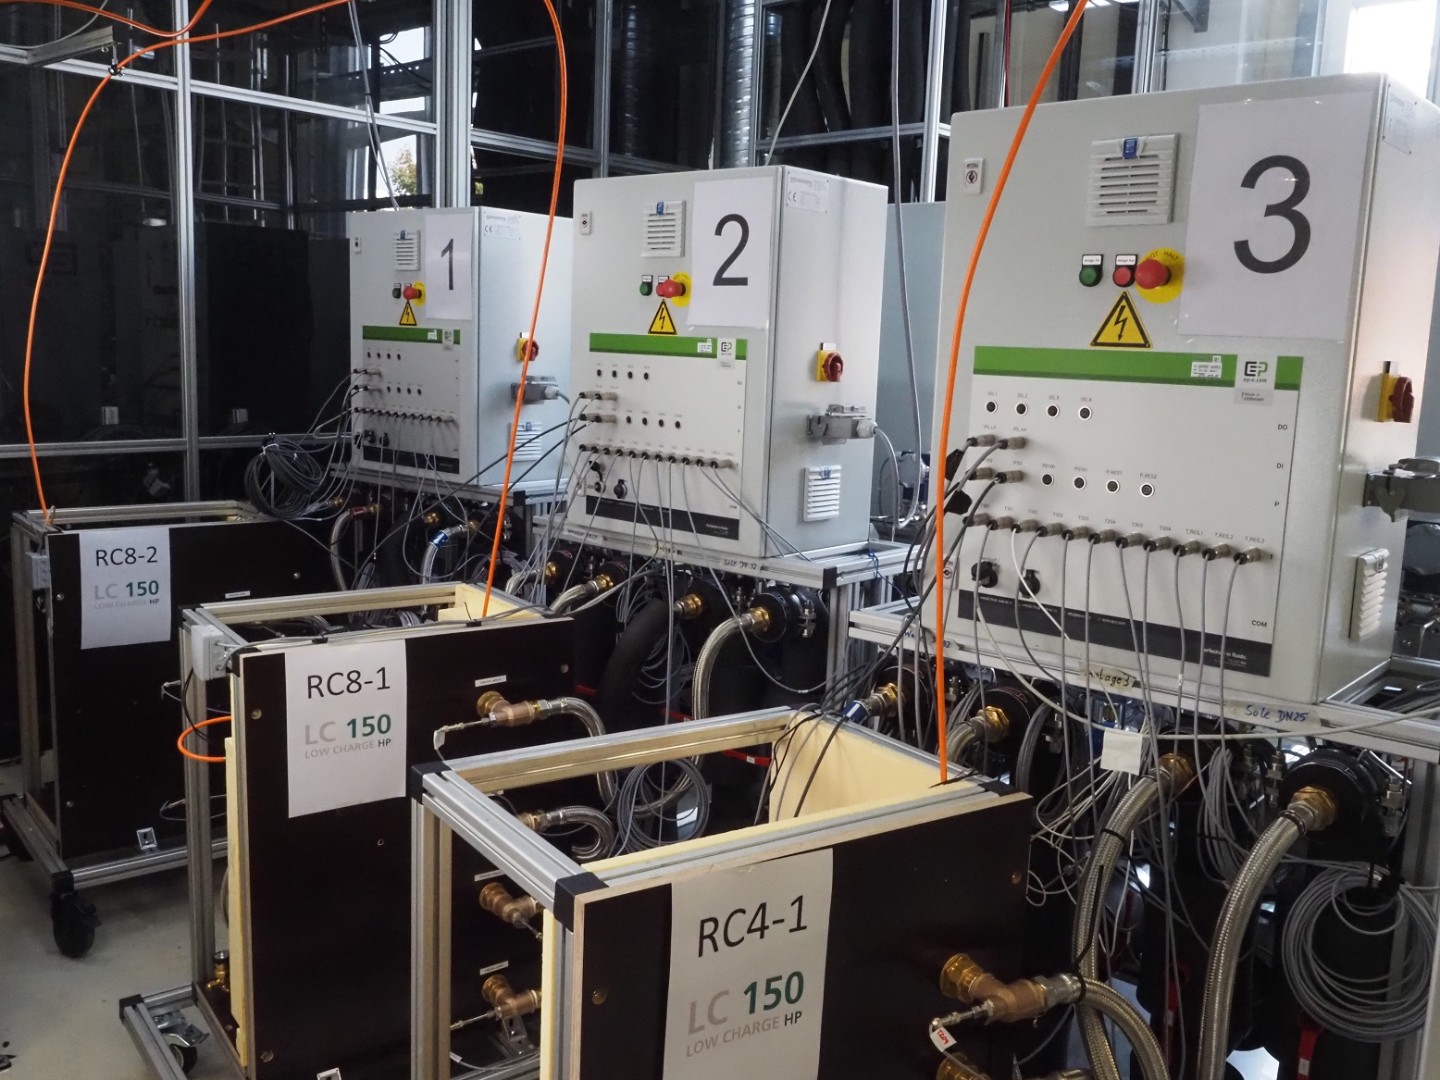 In the measurement campaign, dozens of heat pump component combinations are tested under different operating parameters.